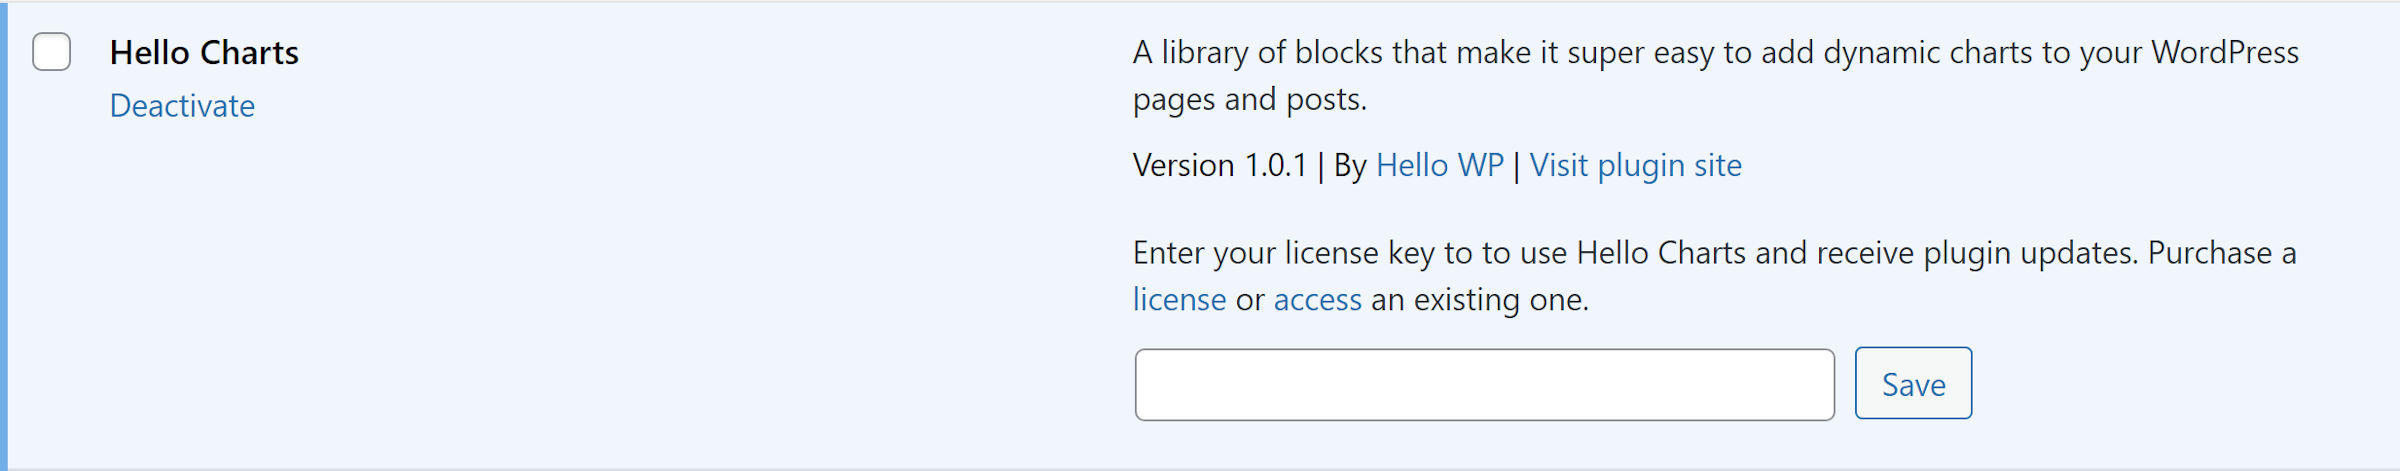 Hello Charts plugin listing from the WordPress Plugins admin screen. It has a license key field beneath its description and data.